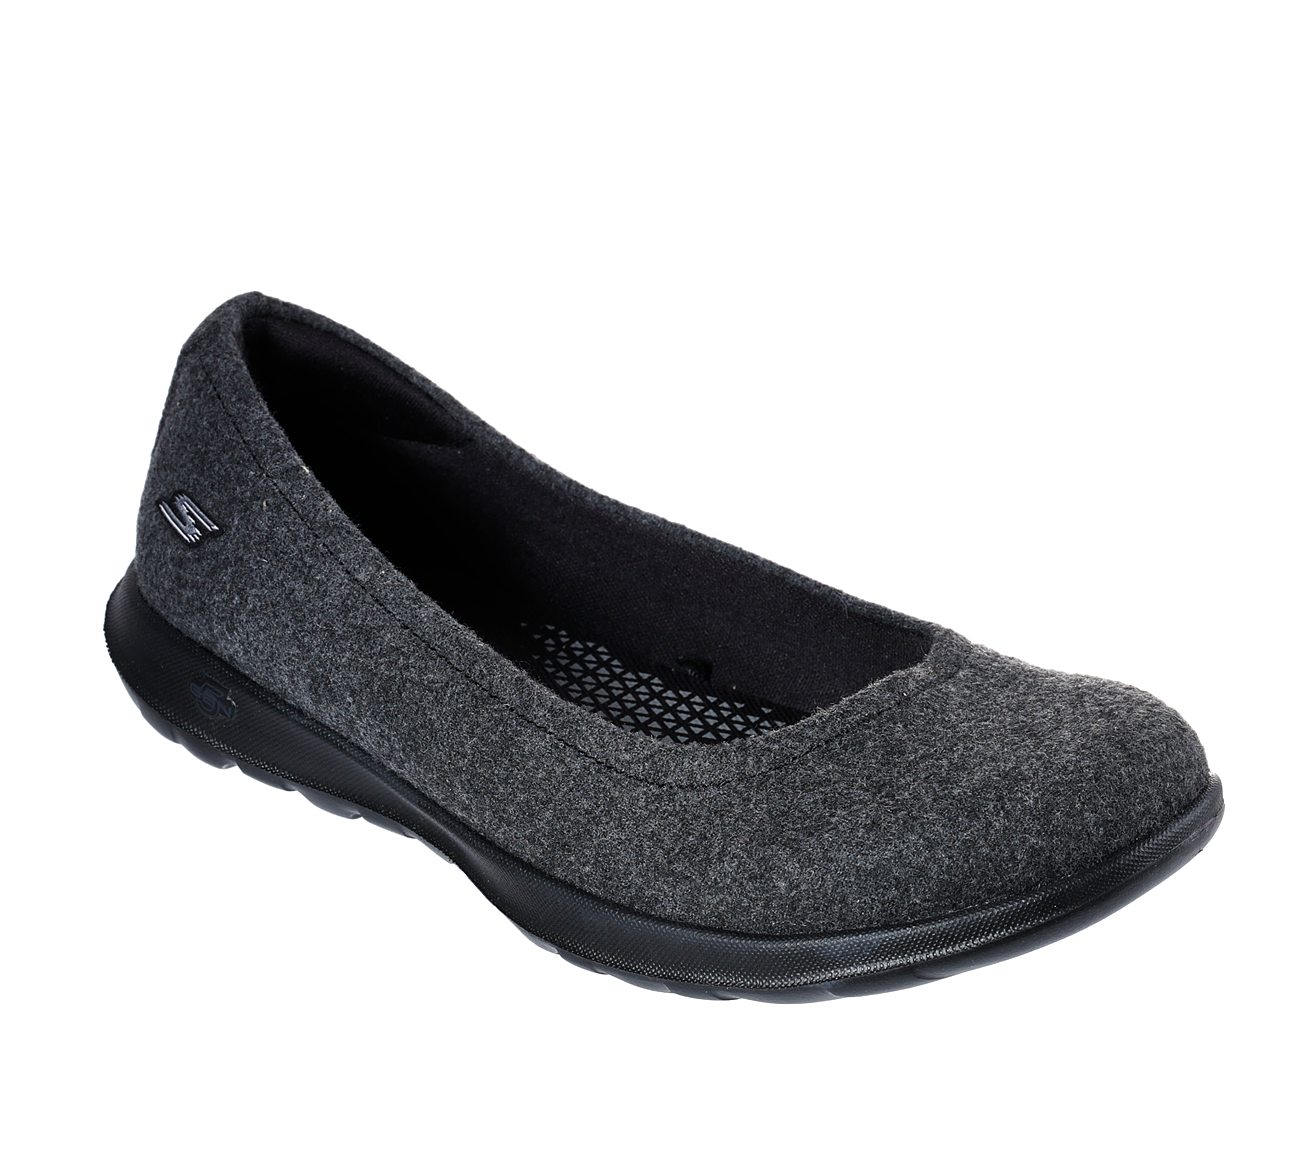 ladies skechers dolly shoes \u003e Clearance 